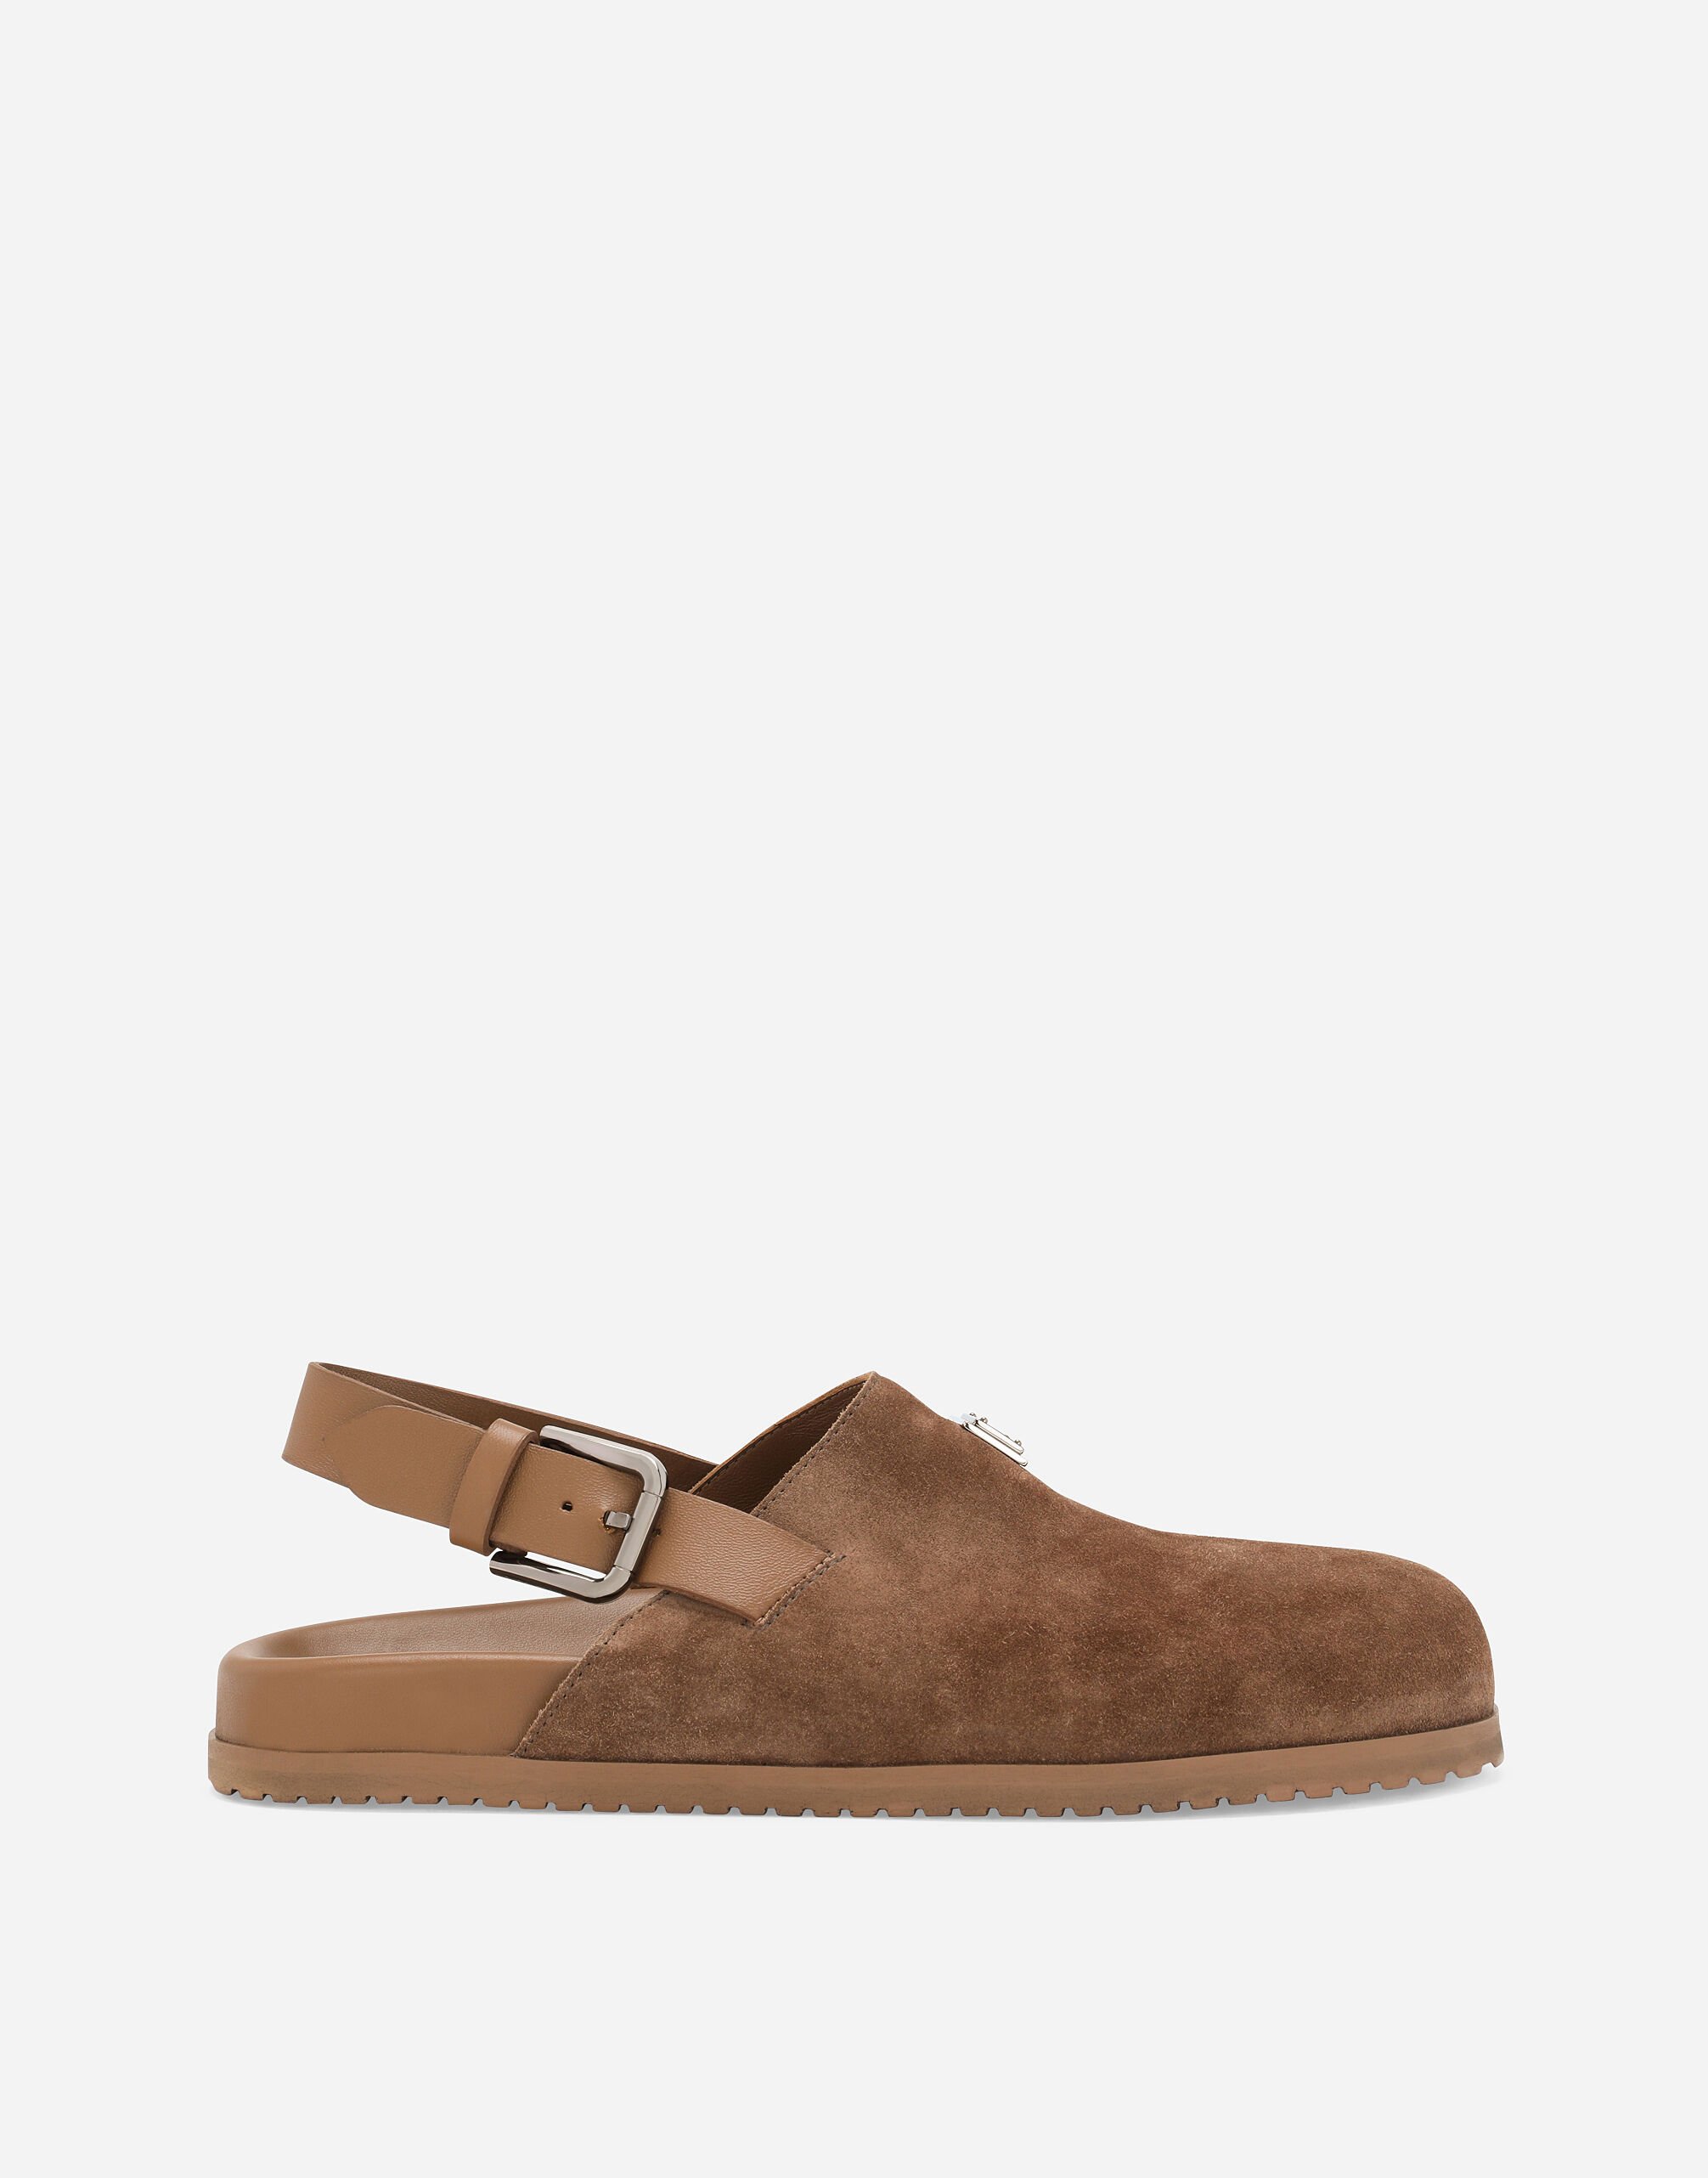 Dolce & Gabbana Suede mules with logo tag Print VH0001VH000